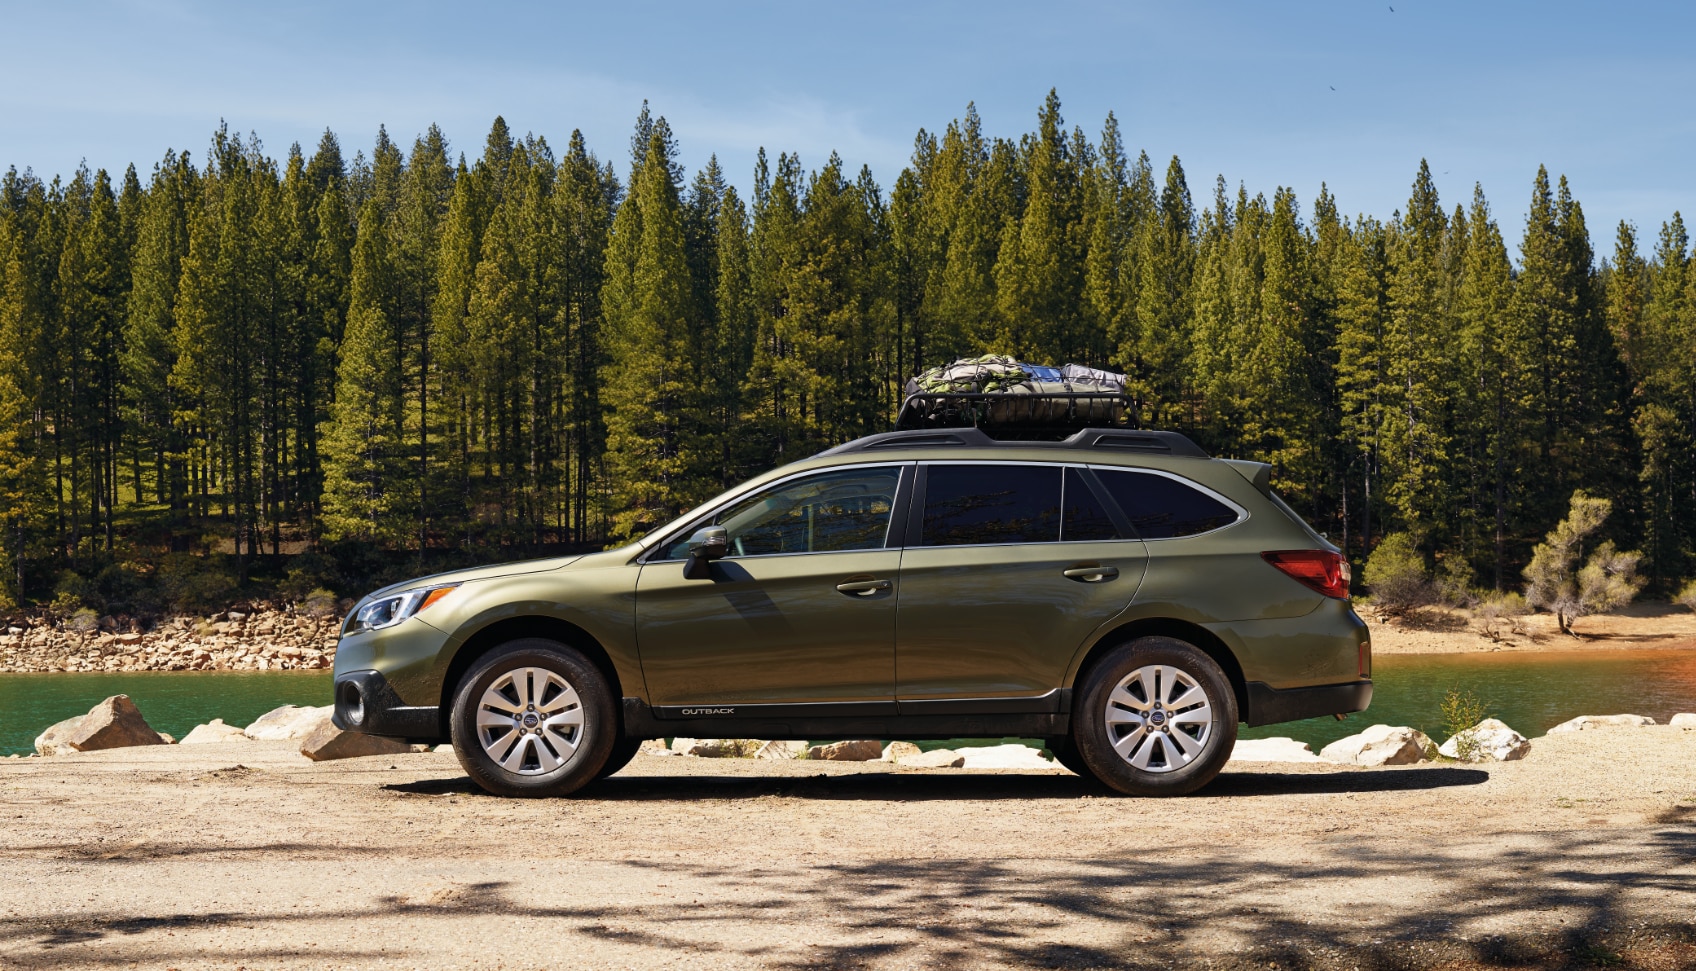 2017 Subaru Outback for sale in Wallingford, CT